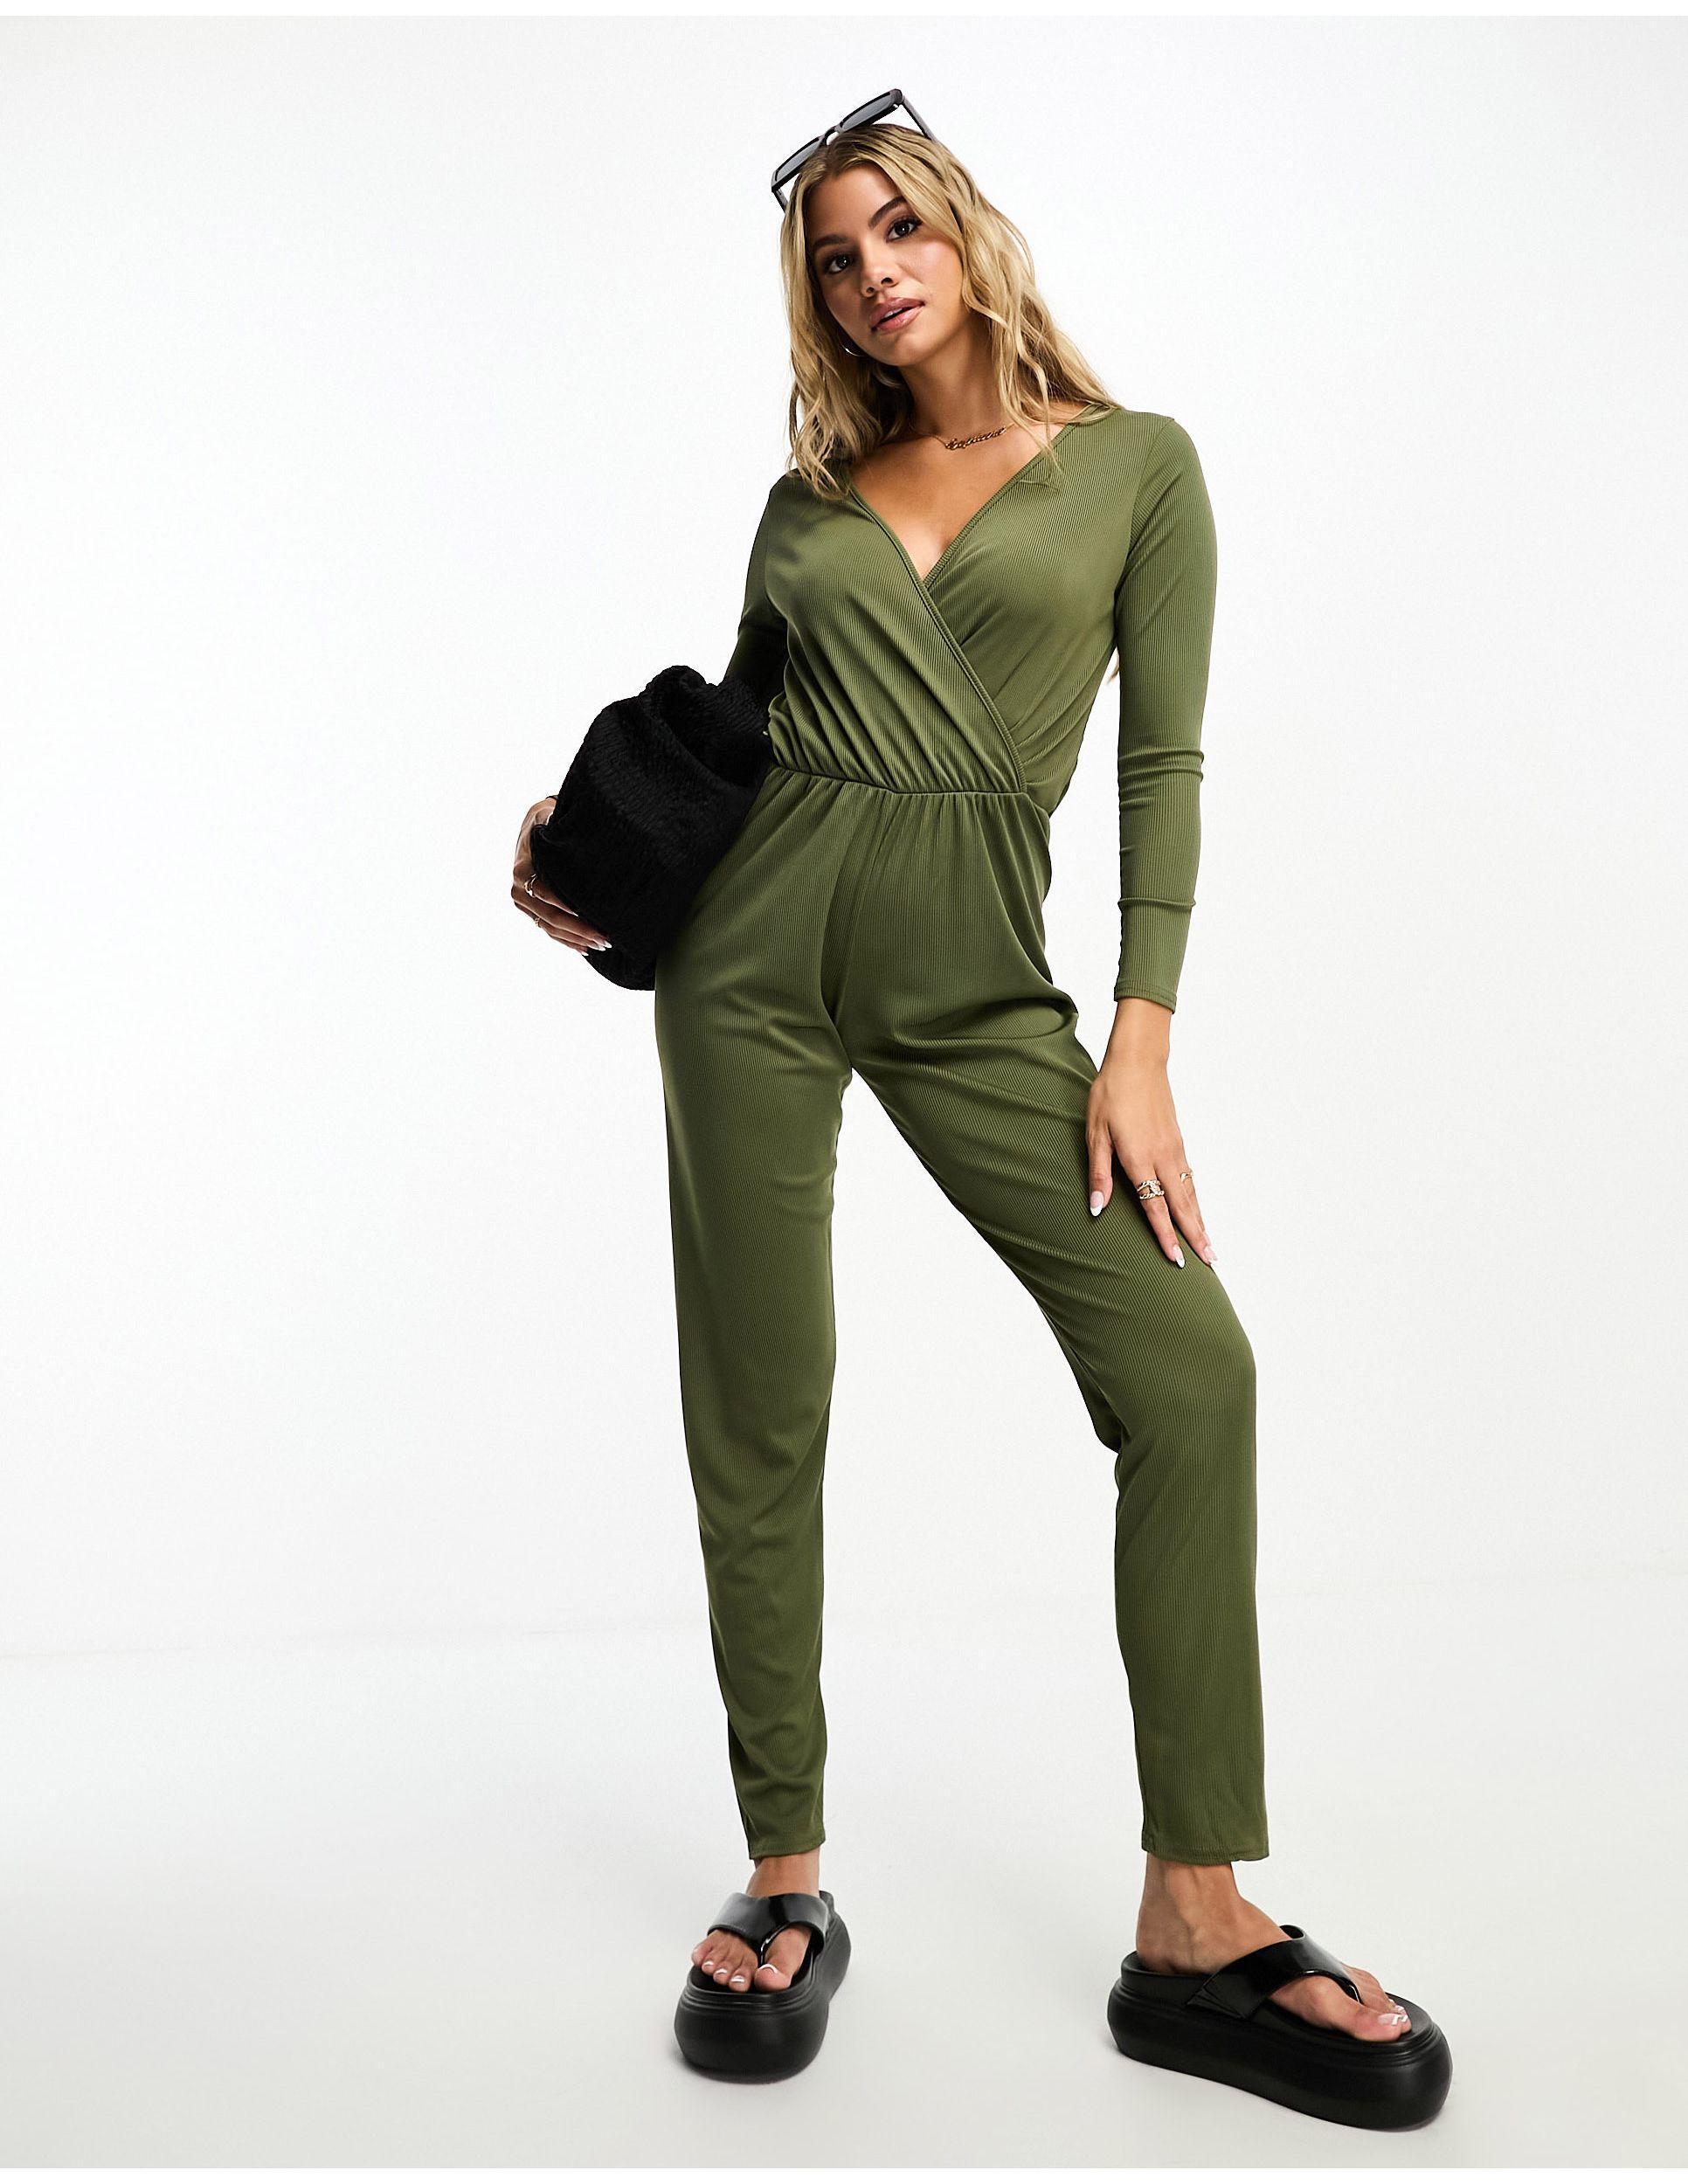 I Saw It First Sequin High Neck Flared Leg Jumpsuit | SportsDirect.com  Latvia